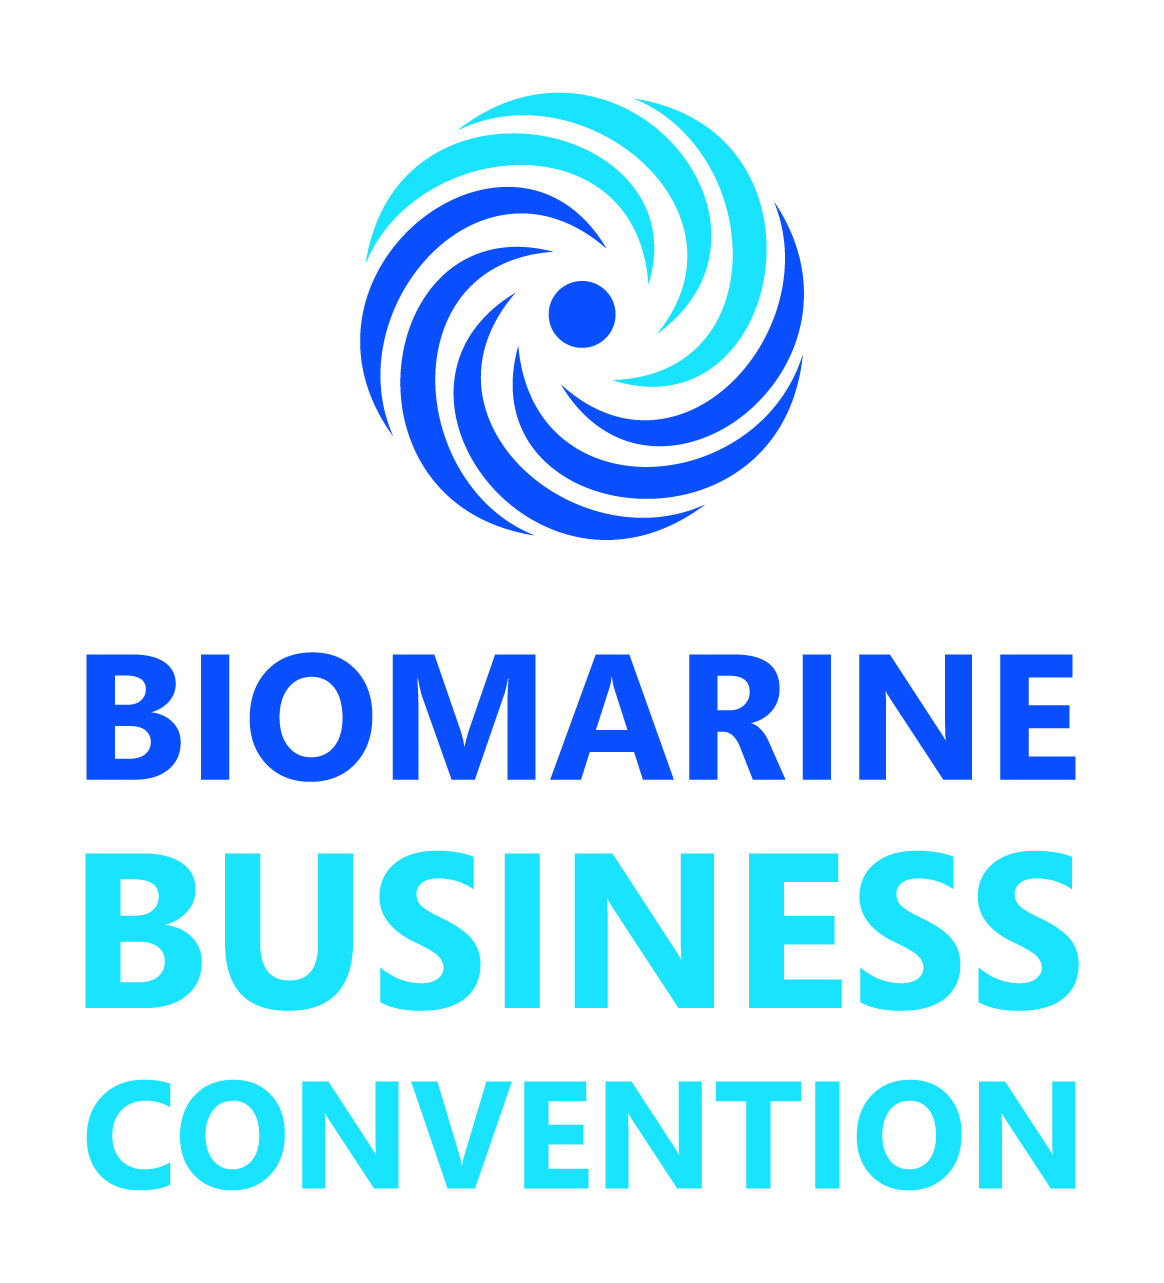 Invitation to attend the 4th BioMarine Business Convention